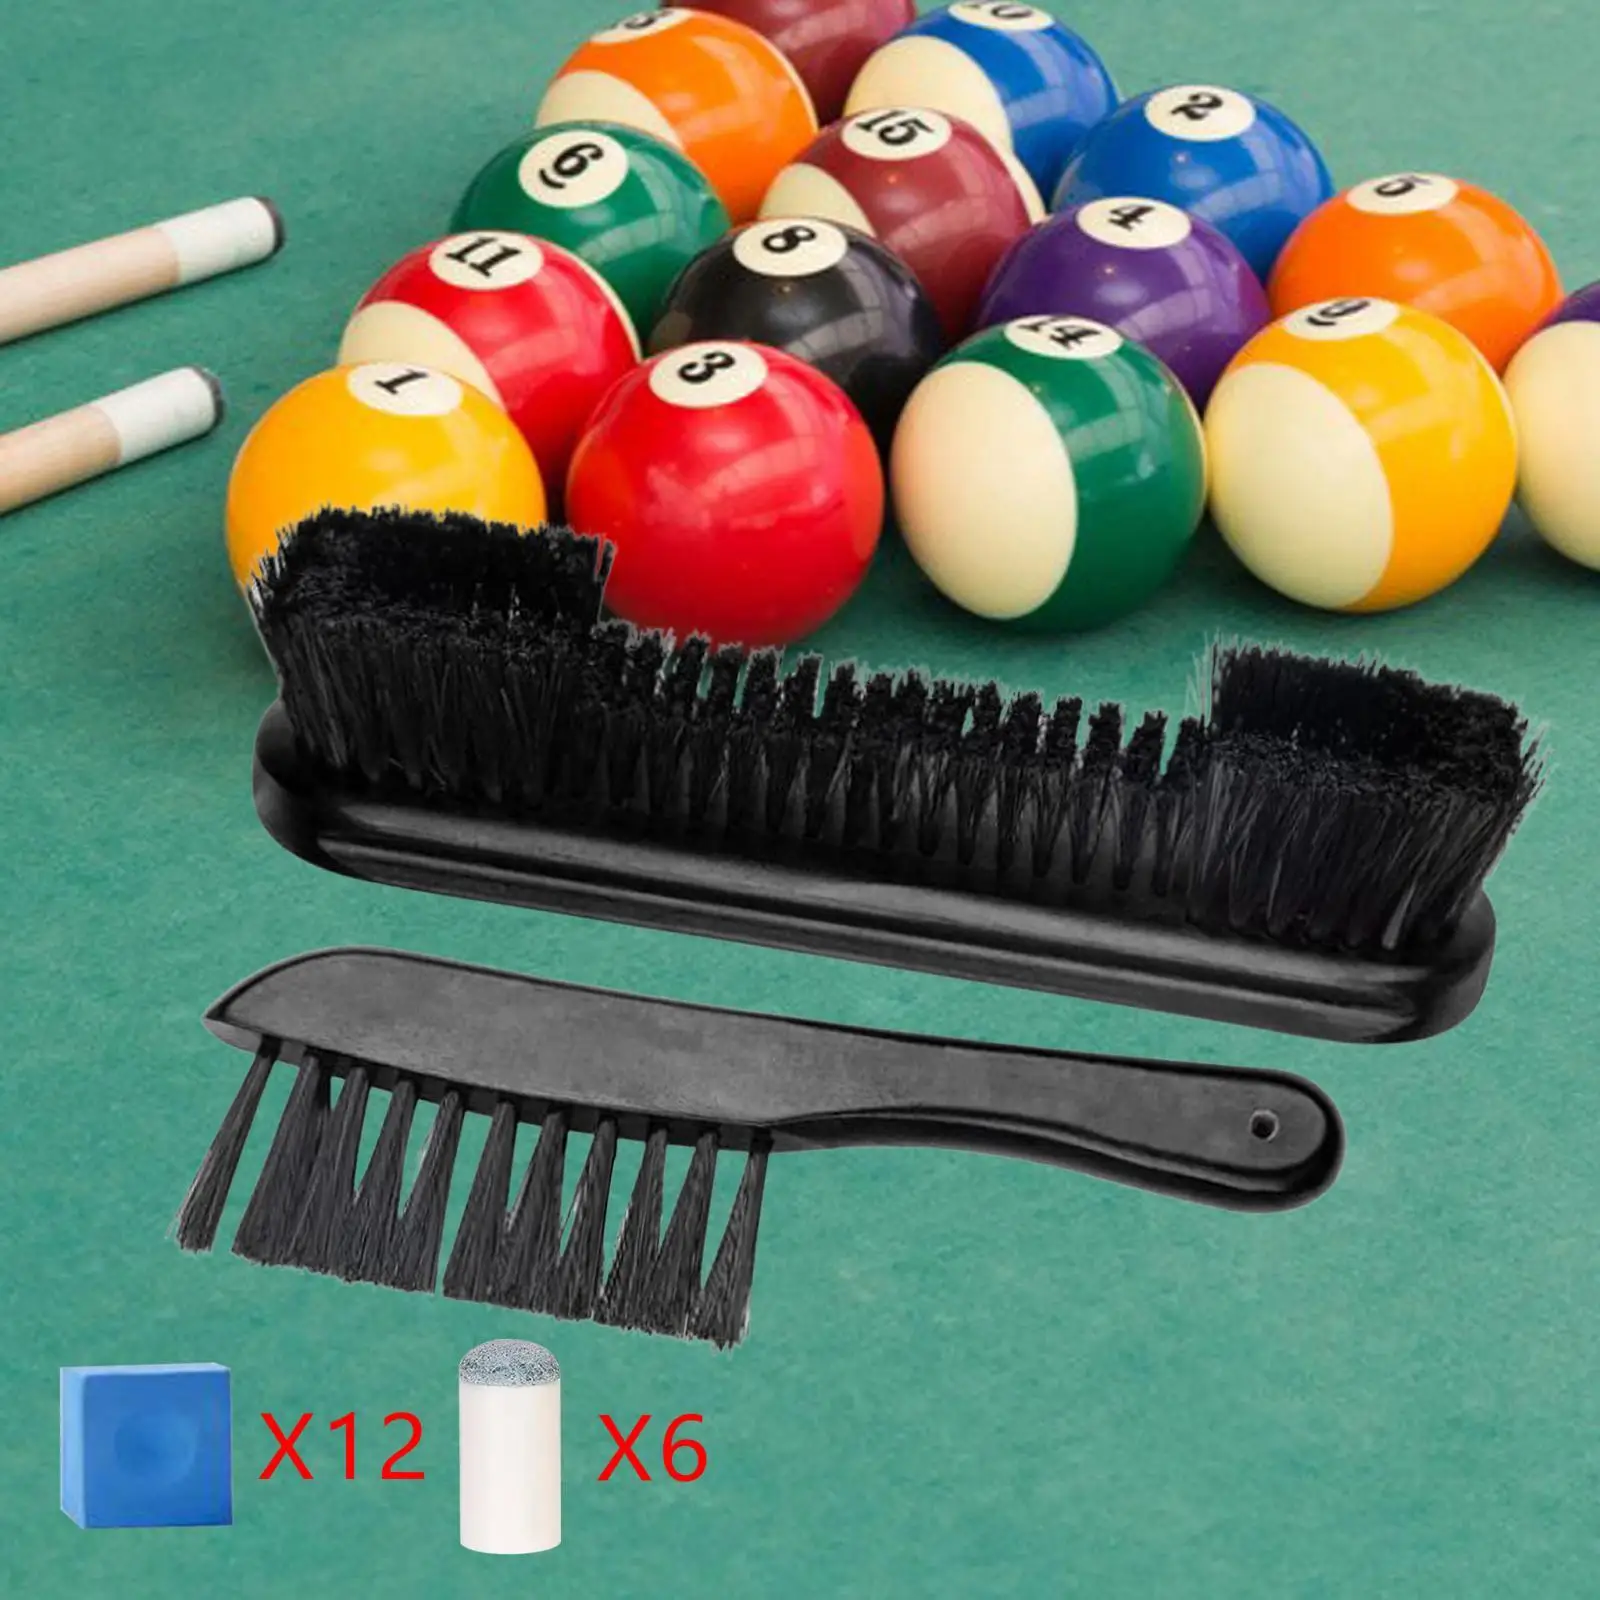 Billiard Table Brush Cleaning Tools Durable Practical Billiards Table Cleaning Tool Billiard Pool Table Brush and Rail Brush Set